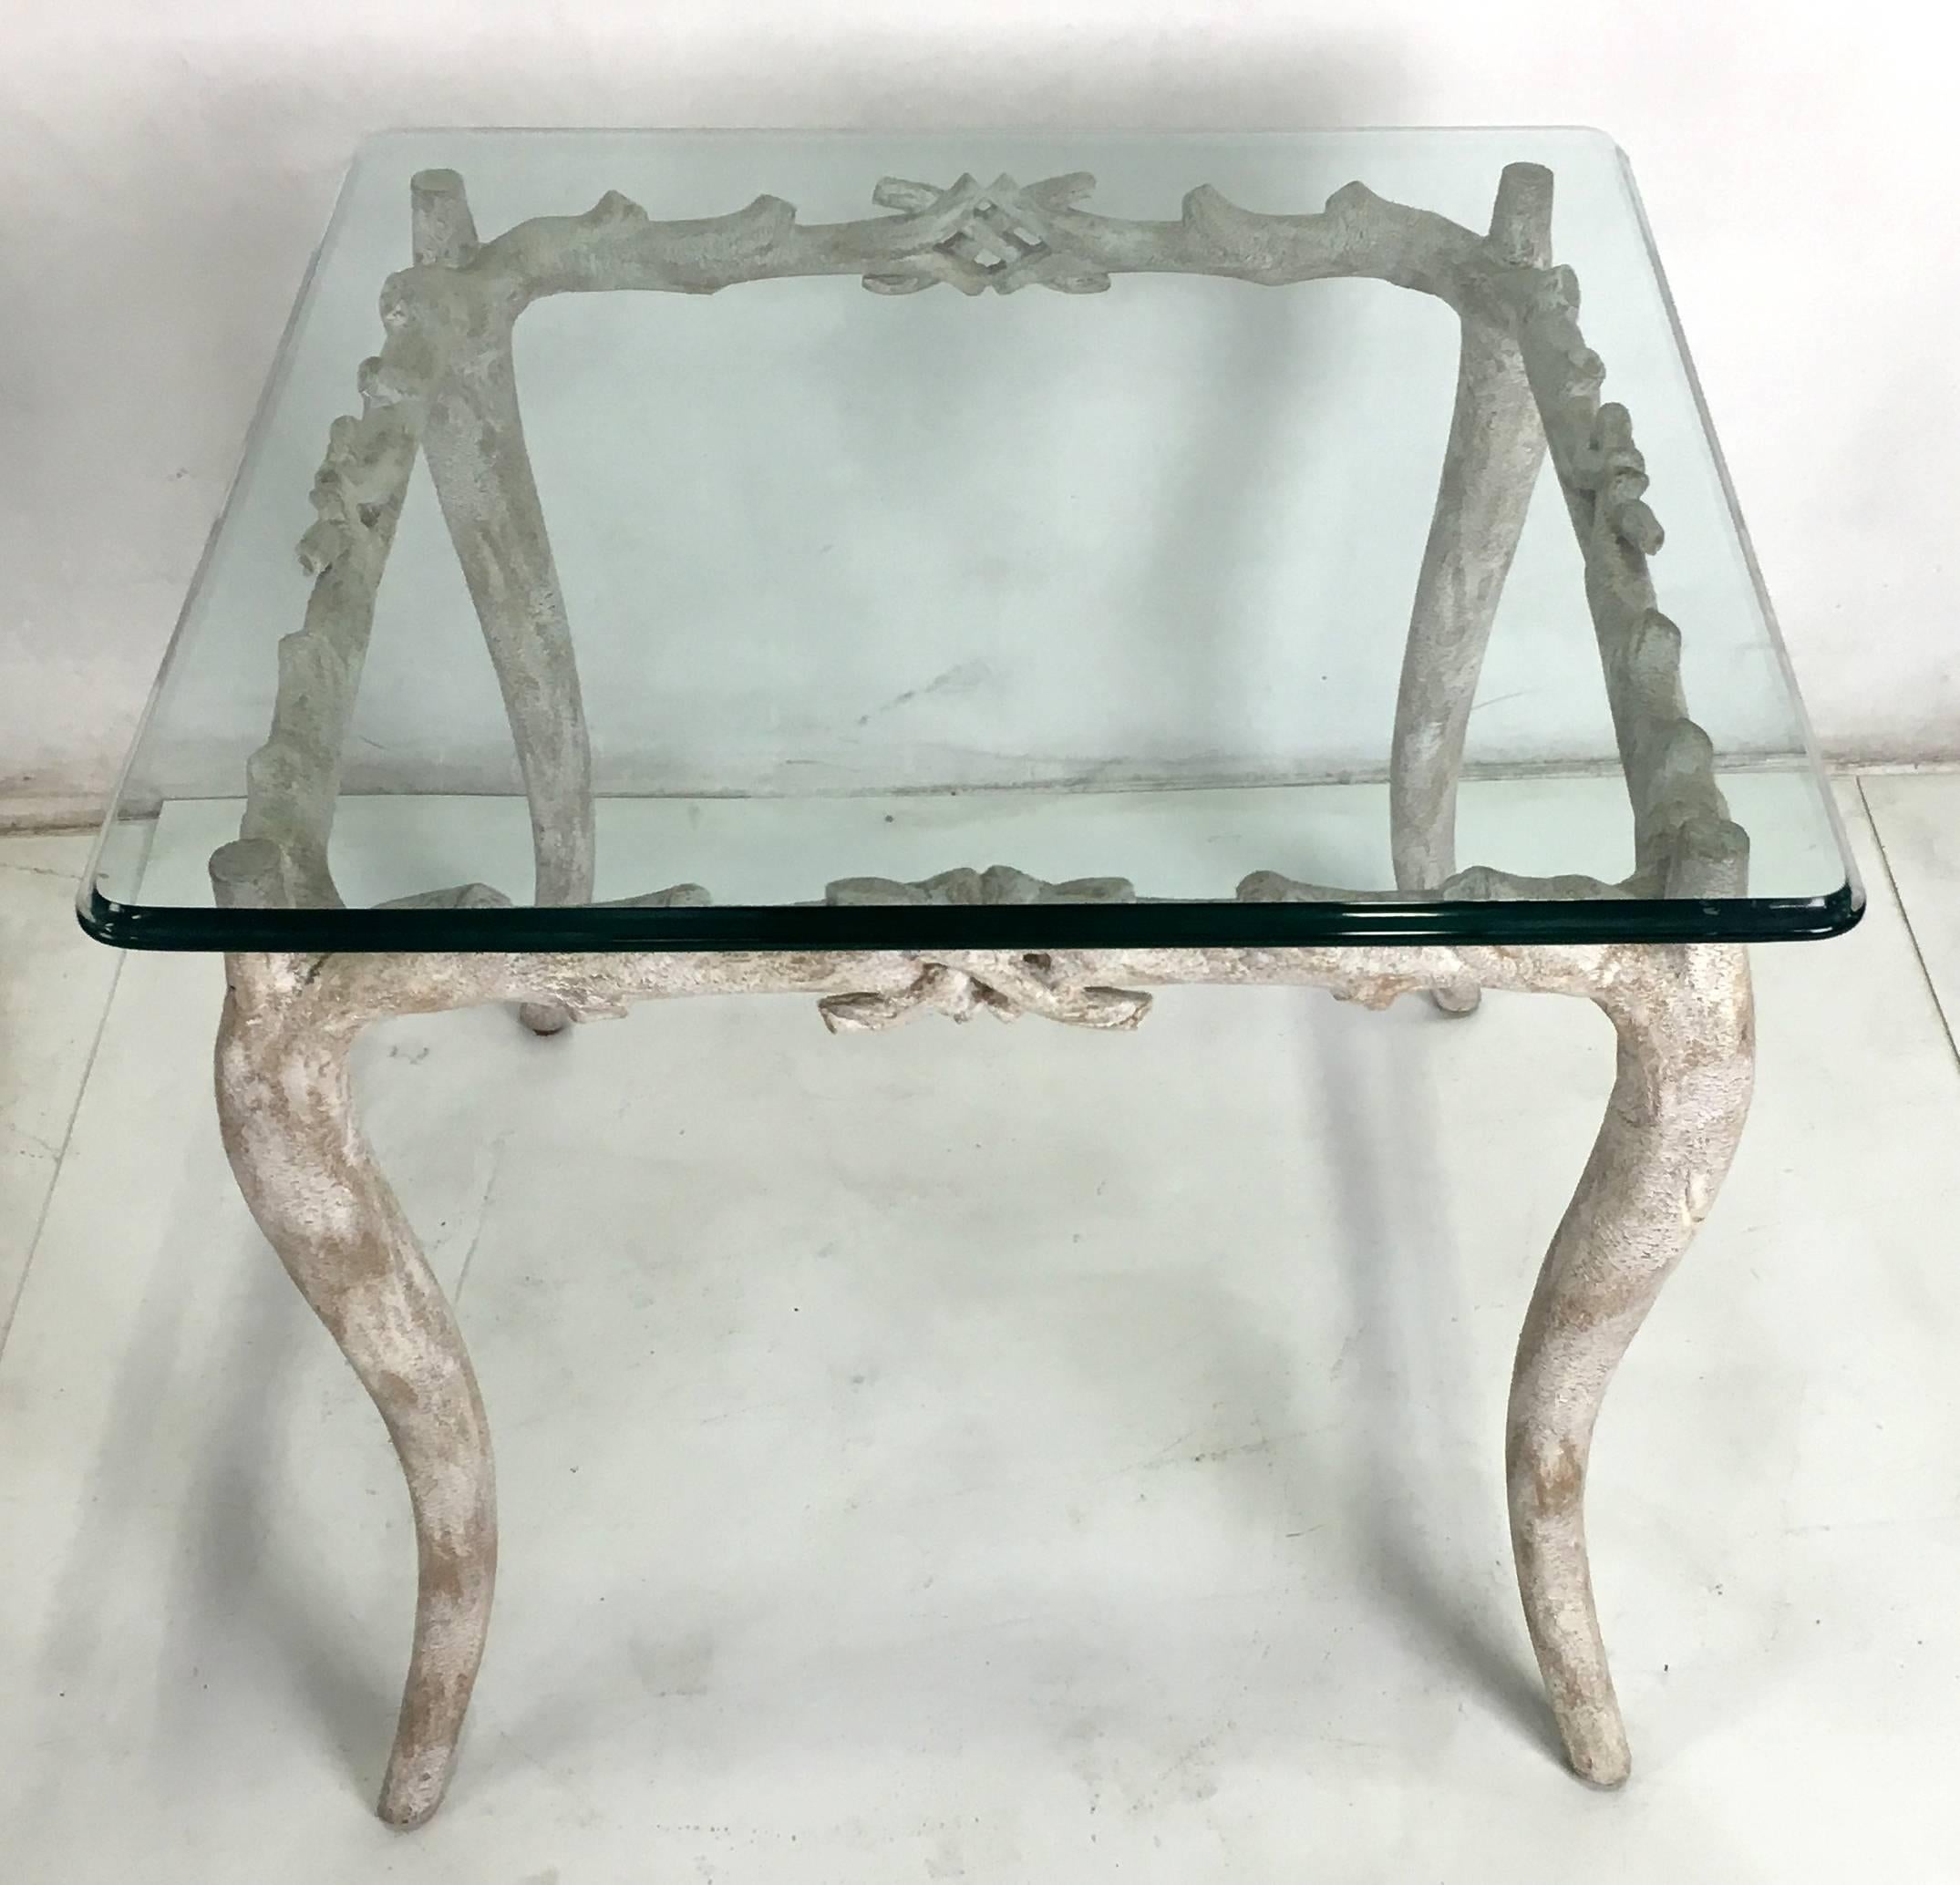 Gorgeous concrete faux bois table with tempered glass top with wonderful aged painted finish.